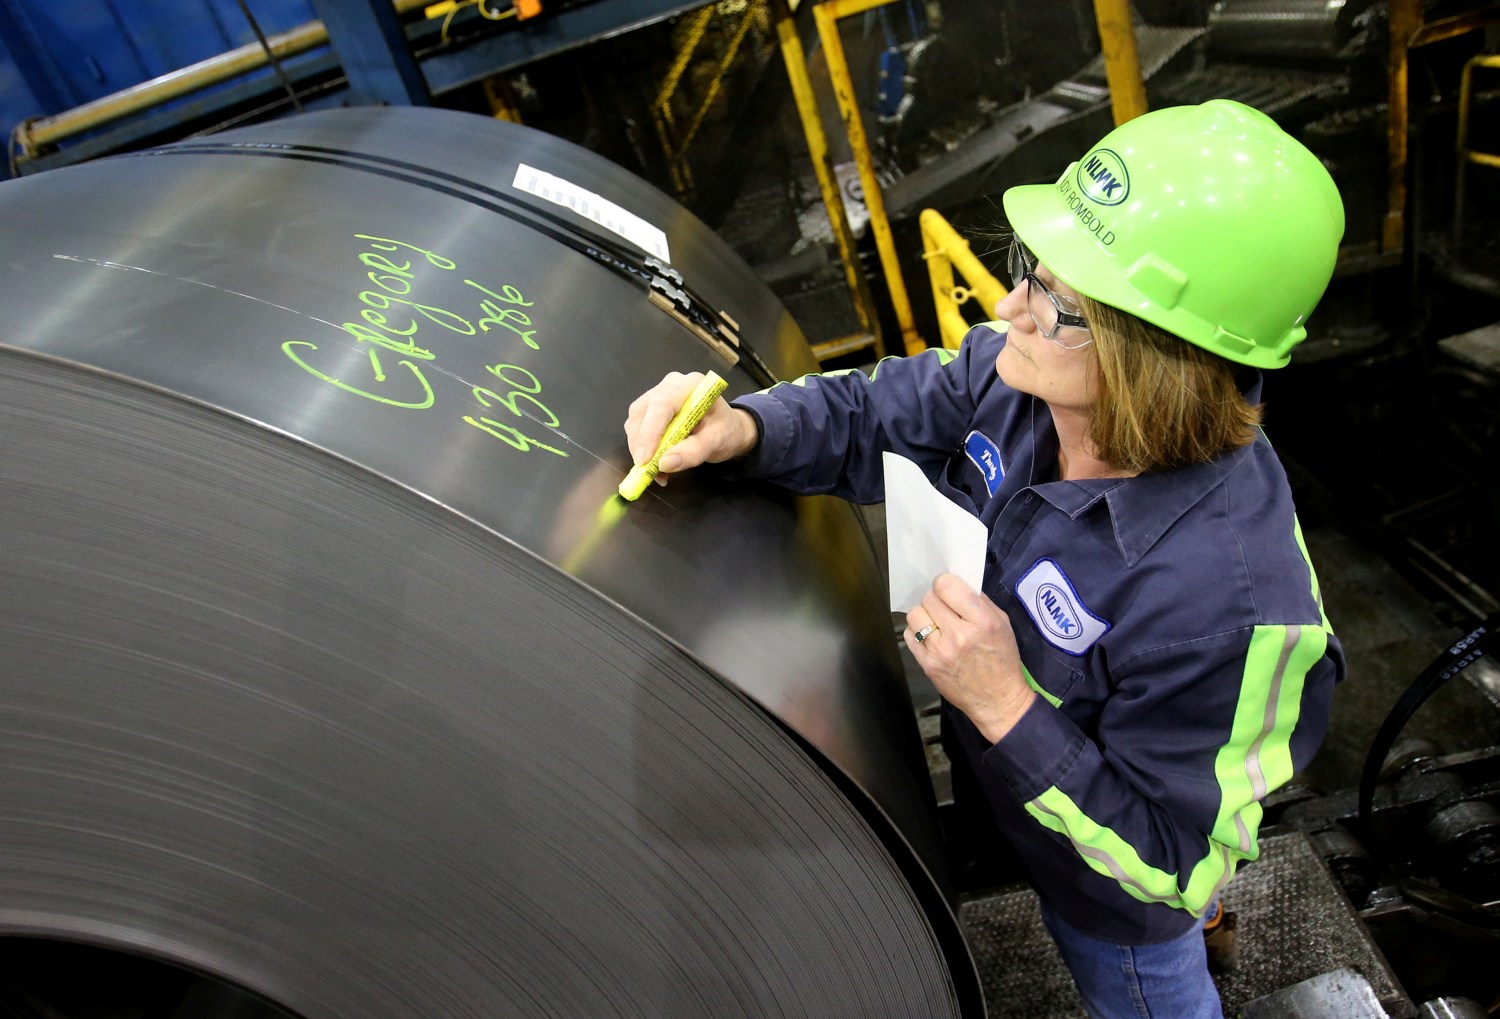 A finished steel coil is marked with its information by a worker at the Novolipetsk Steel PAO steel mill in Farrell, Pennsylvania, U.S., March 9, 2018. REUTERS/Aaron Josefczyk - RC1293A04C30